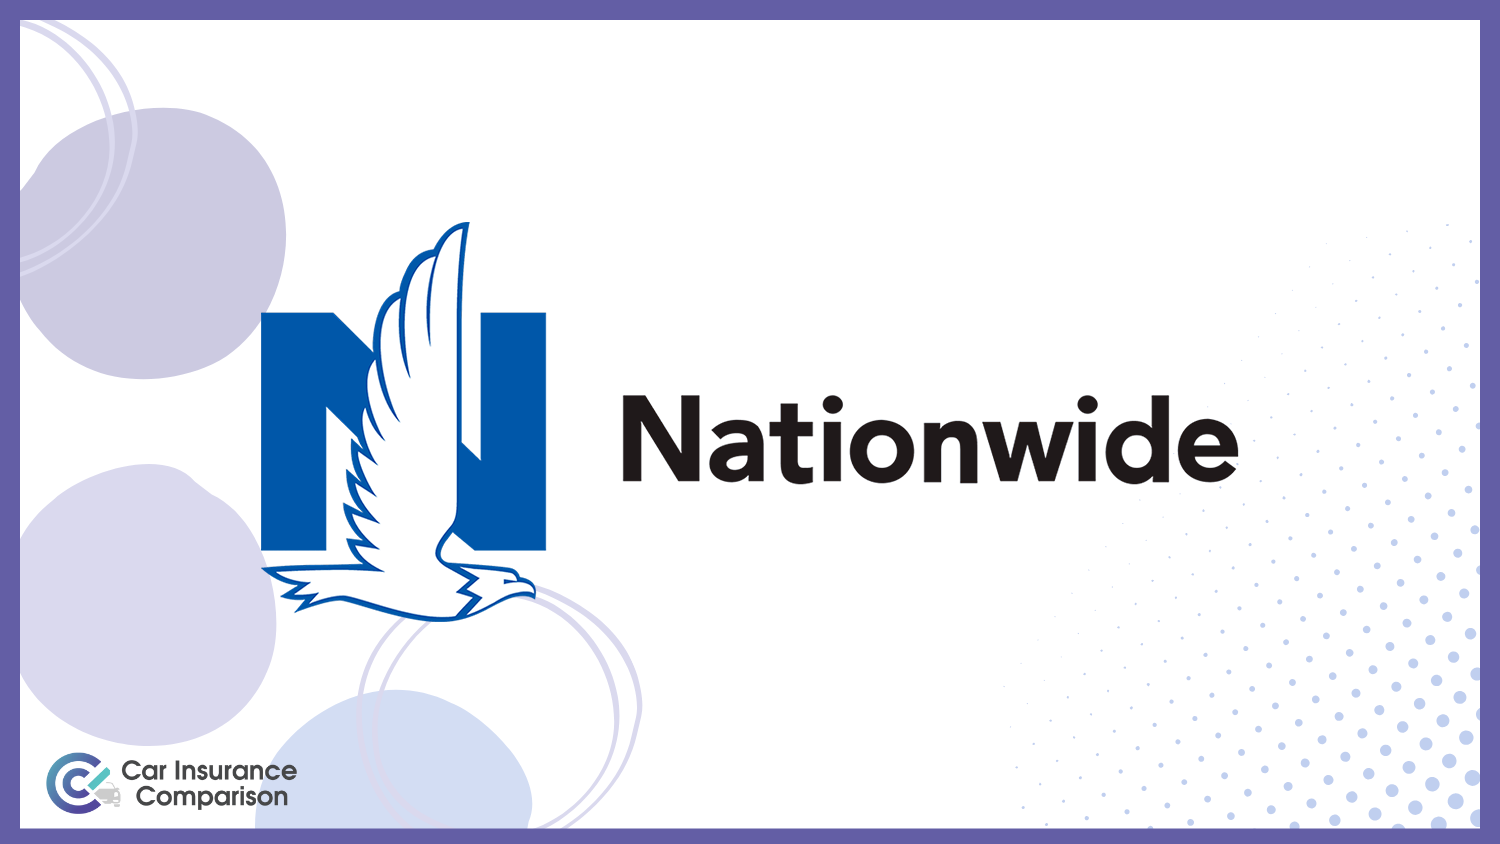 Nationwide: Best Car Insurance for a Bad Driving Record